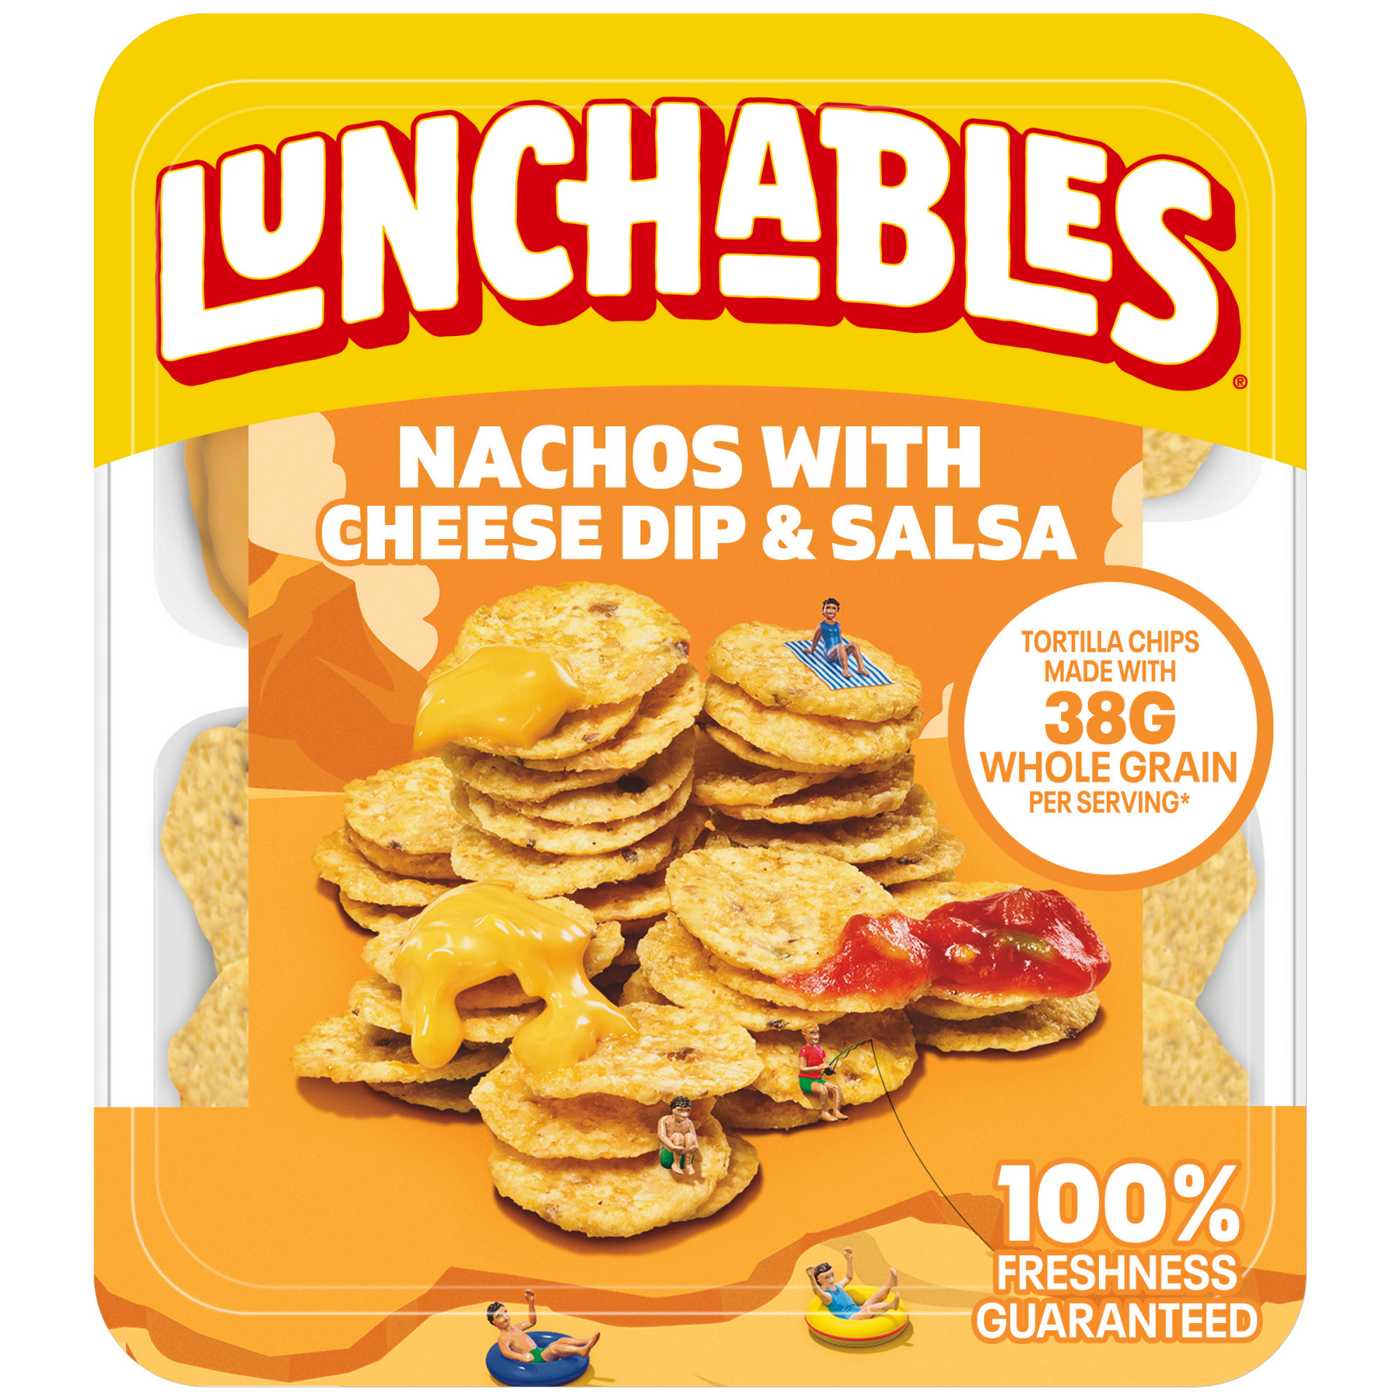 Lunchables Snack Kit Tray - Nachos with Cheese Dip & Salsa; image 1 of 3